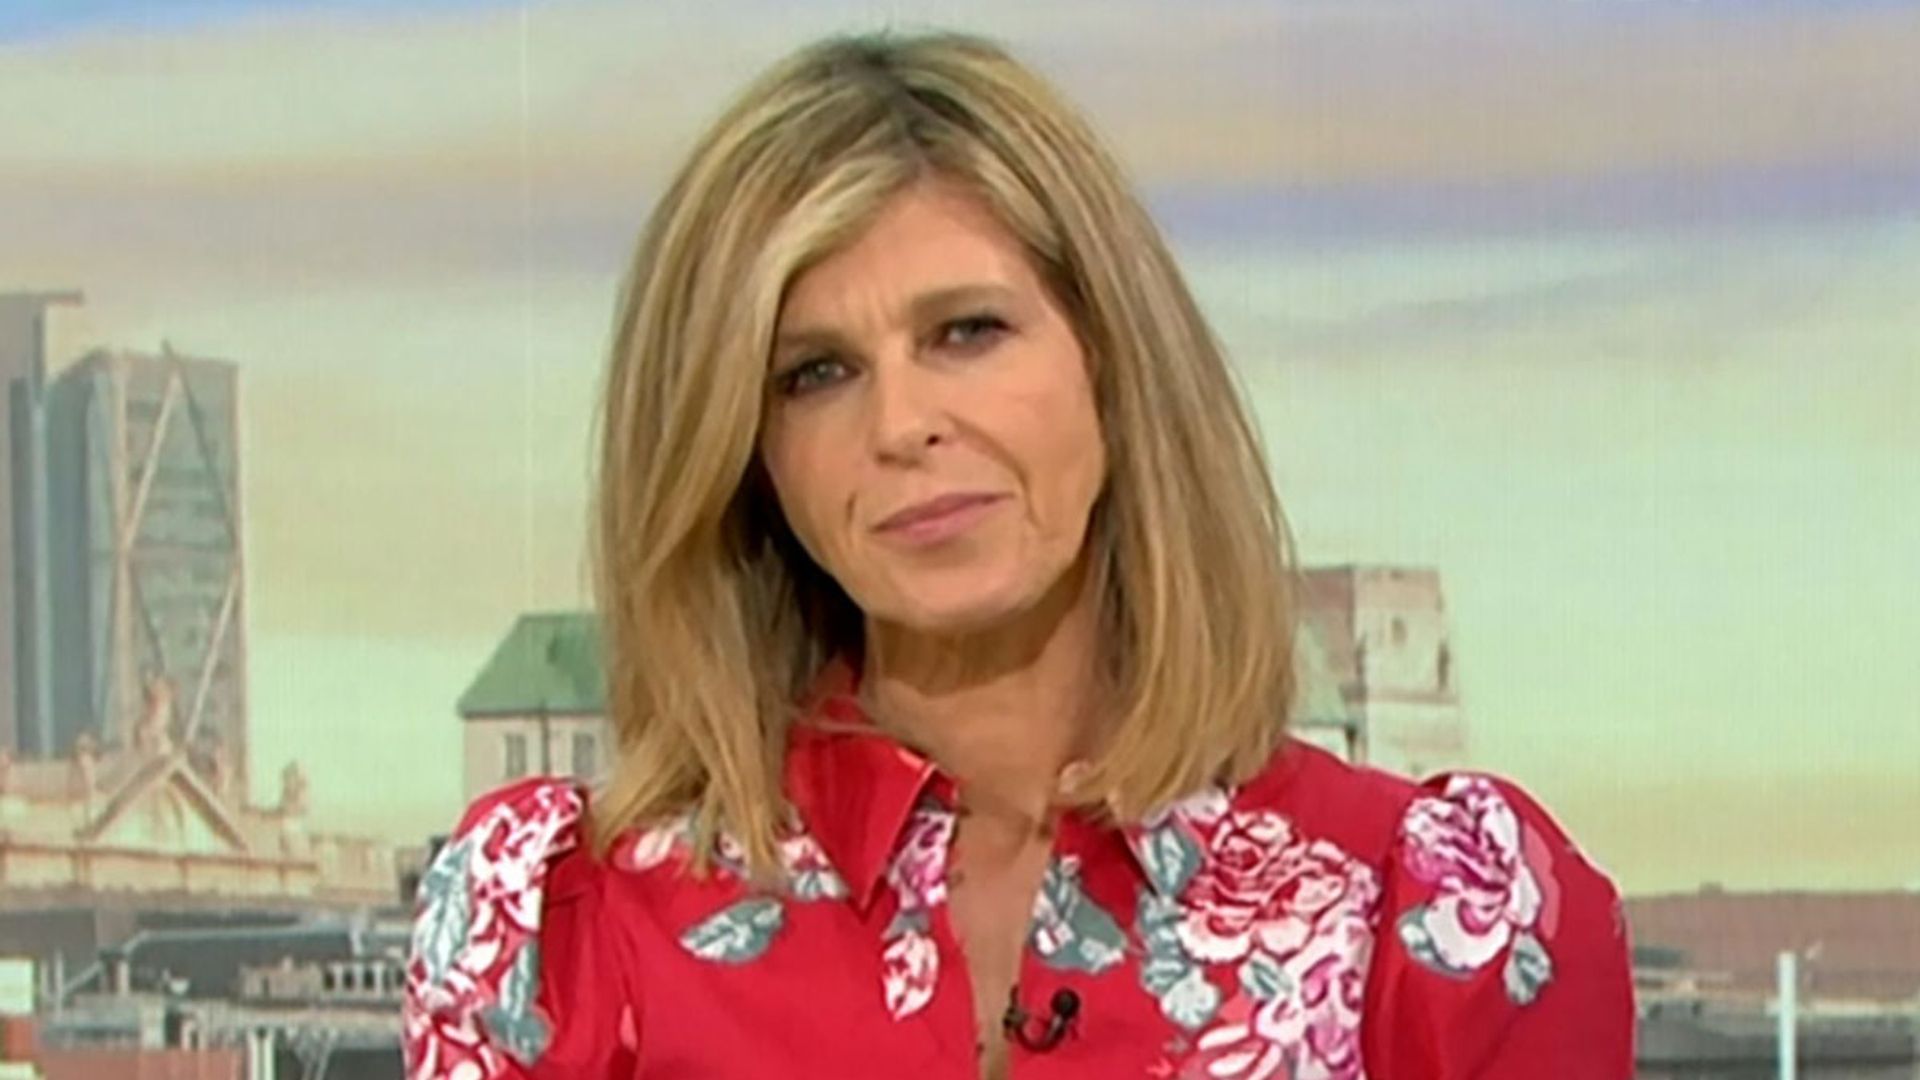 Kate Garraway reveals she underwent same EMDR therapy as Prince Harry following 'traumatic' year